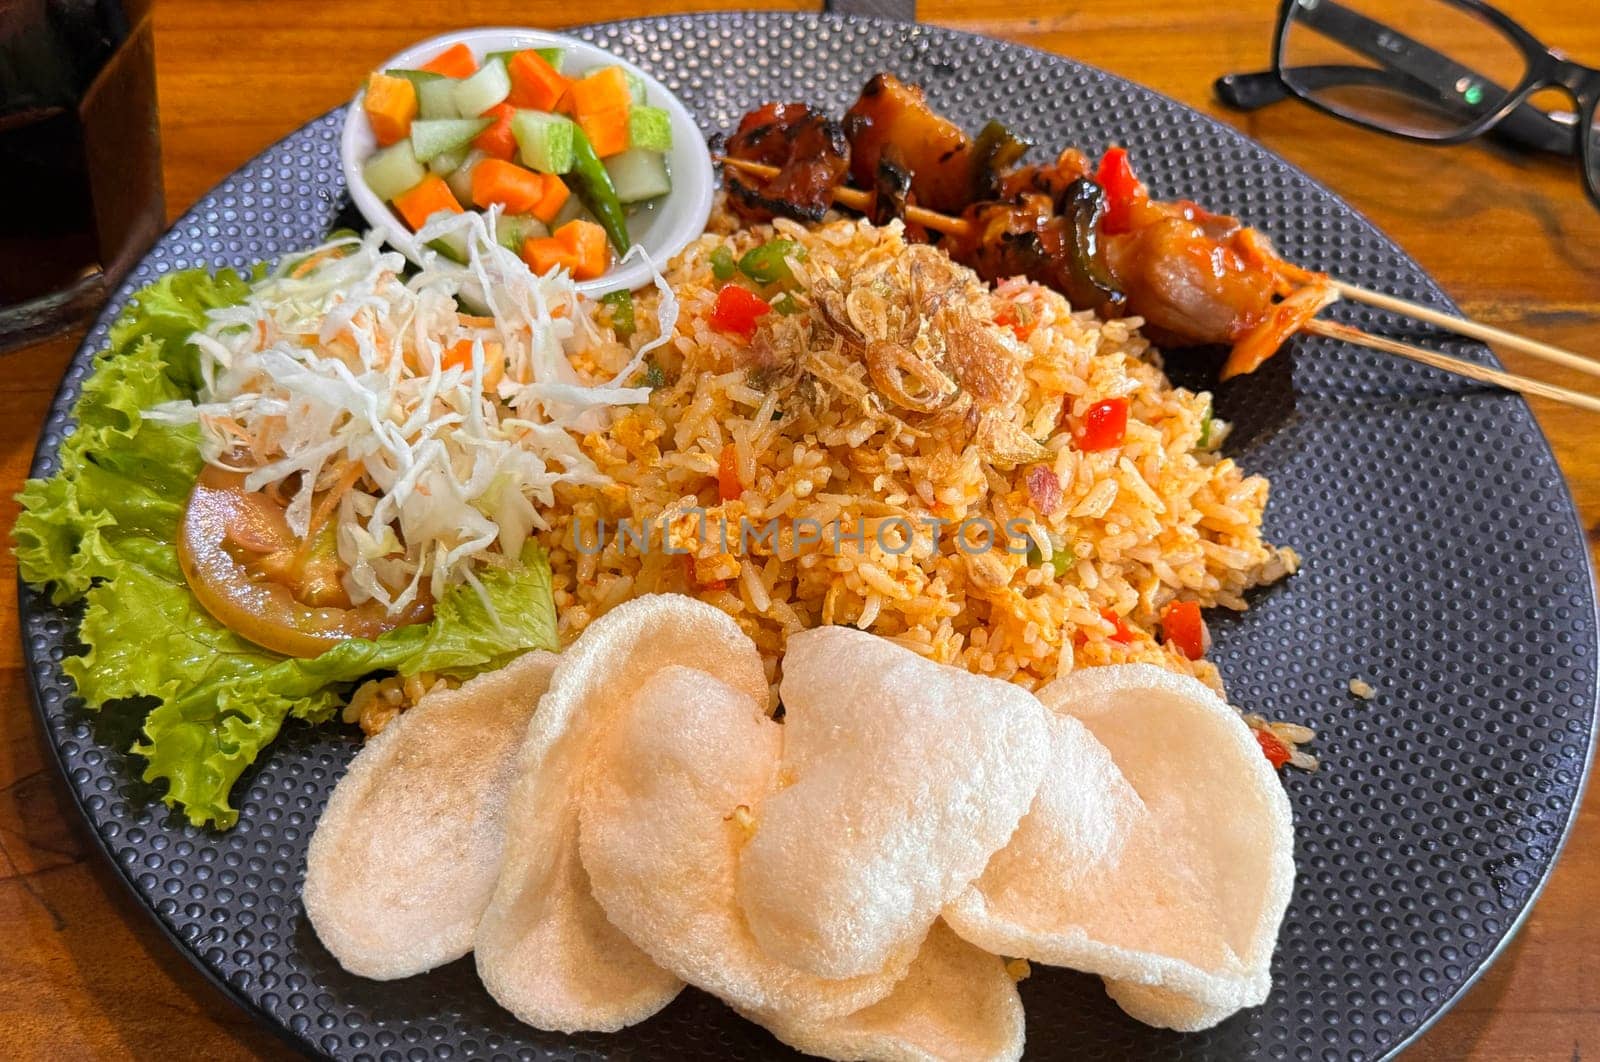 Fired rice or nasi goreng Indonesian chicken fried rice served with pickled cucumber and onion and chili with prawn crackers with satay as condiment on grey plate